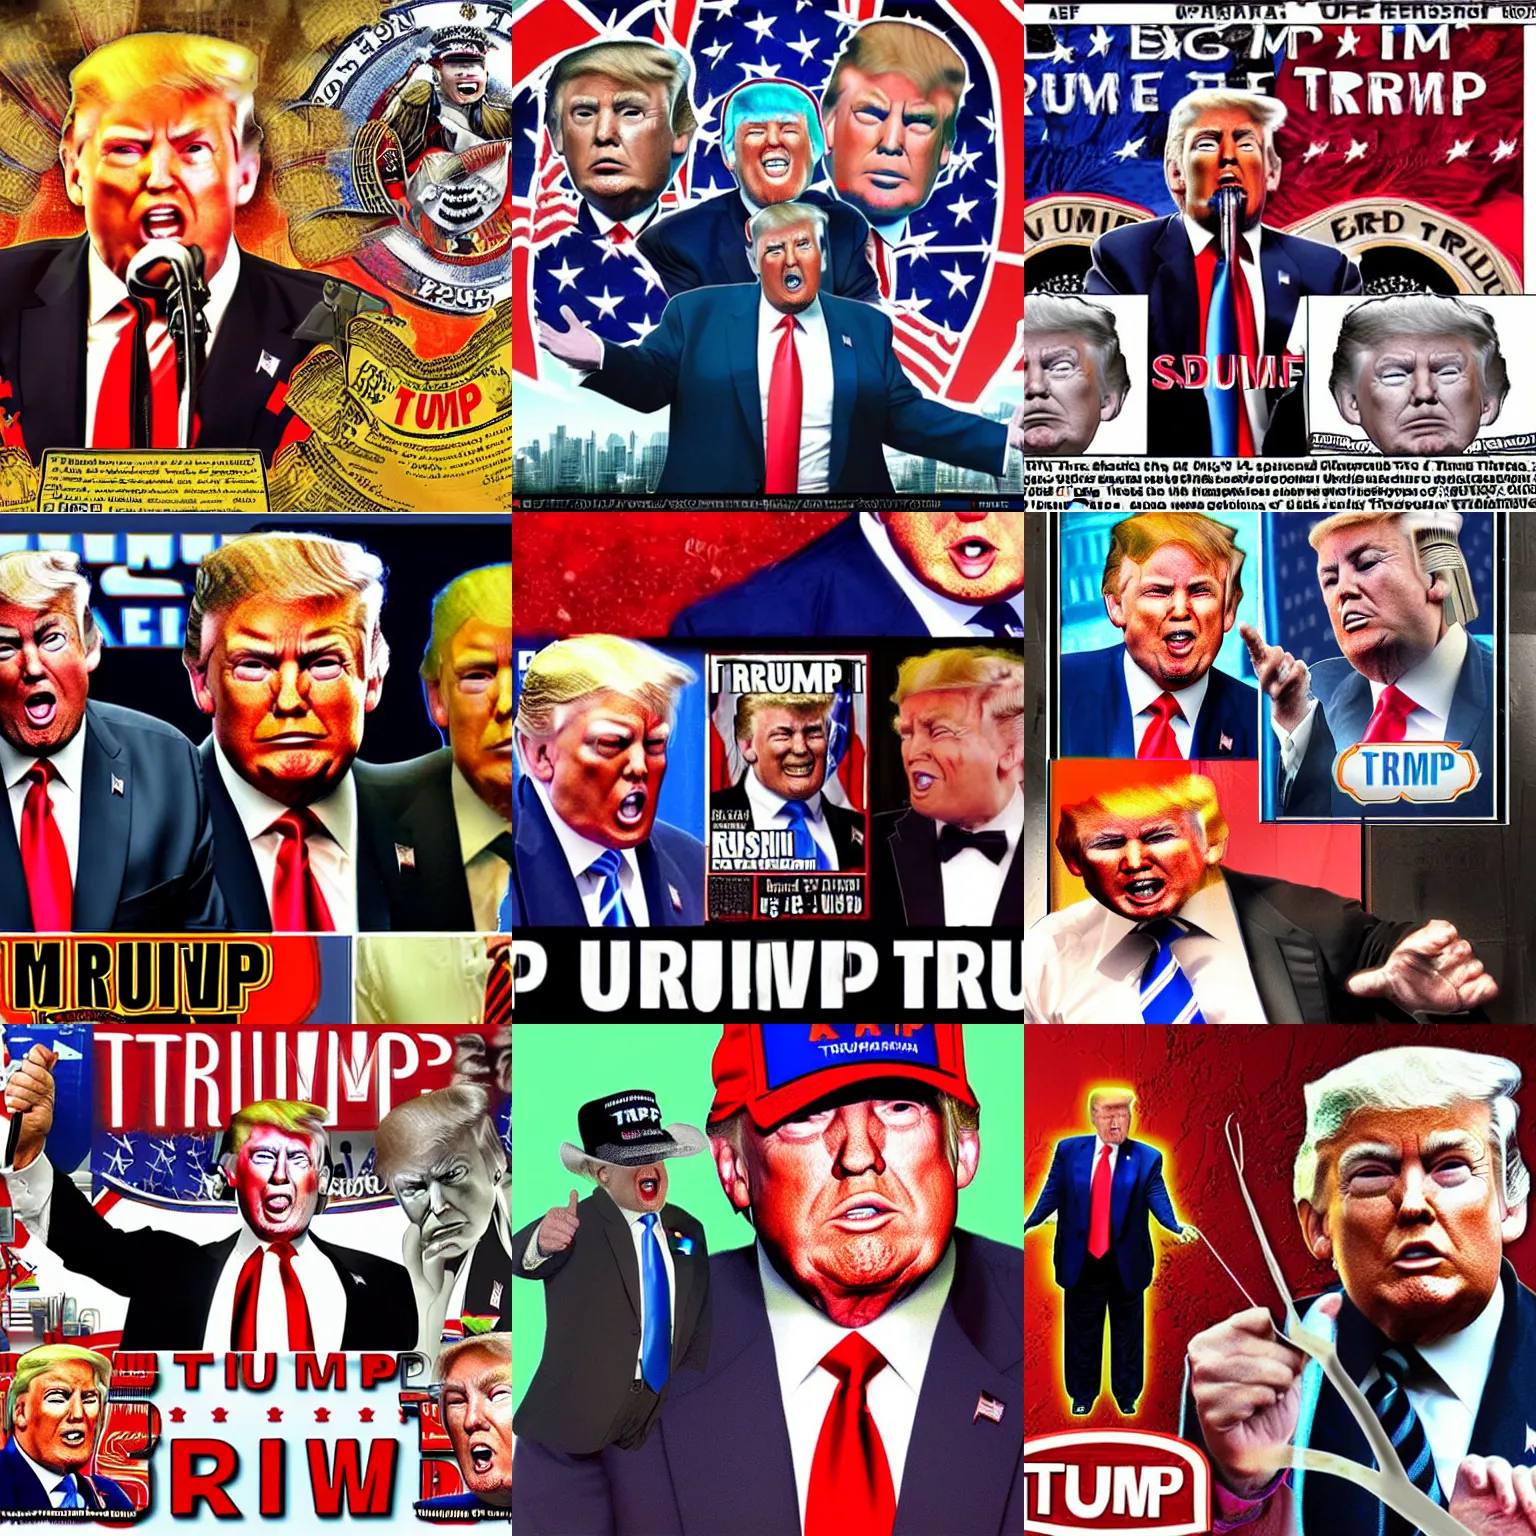 Prompt: David Dees Conspiracy Image featuring Donald Trump and misspellings of the word Trump Trump Trump Trump